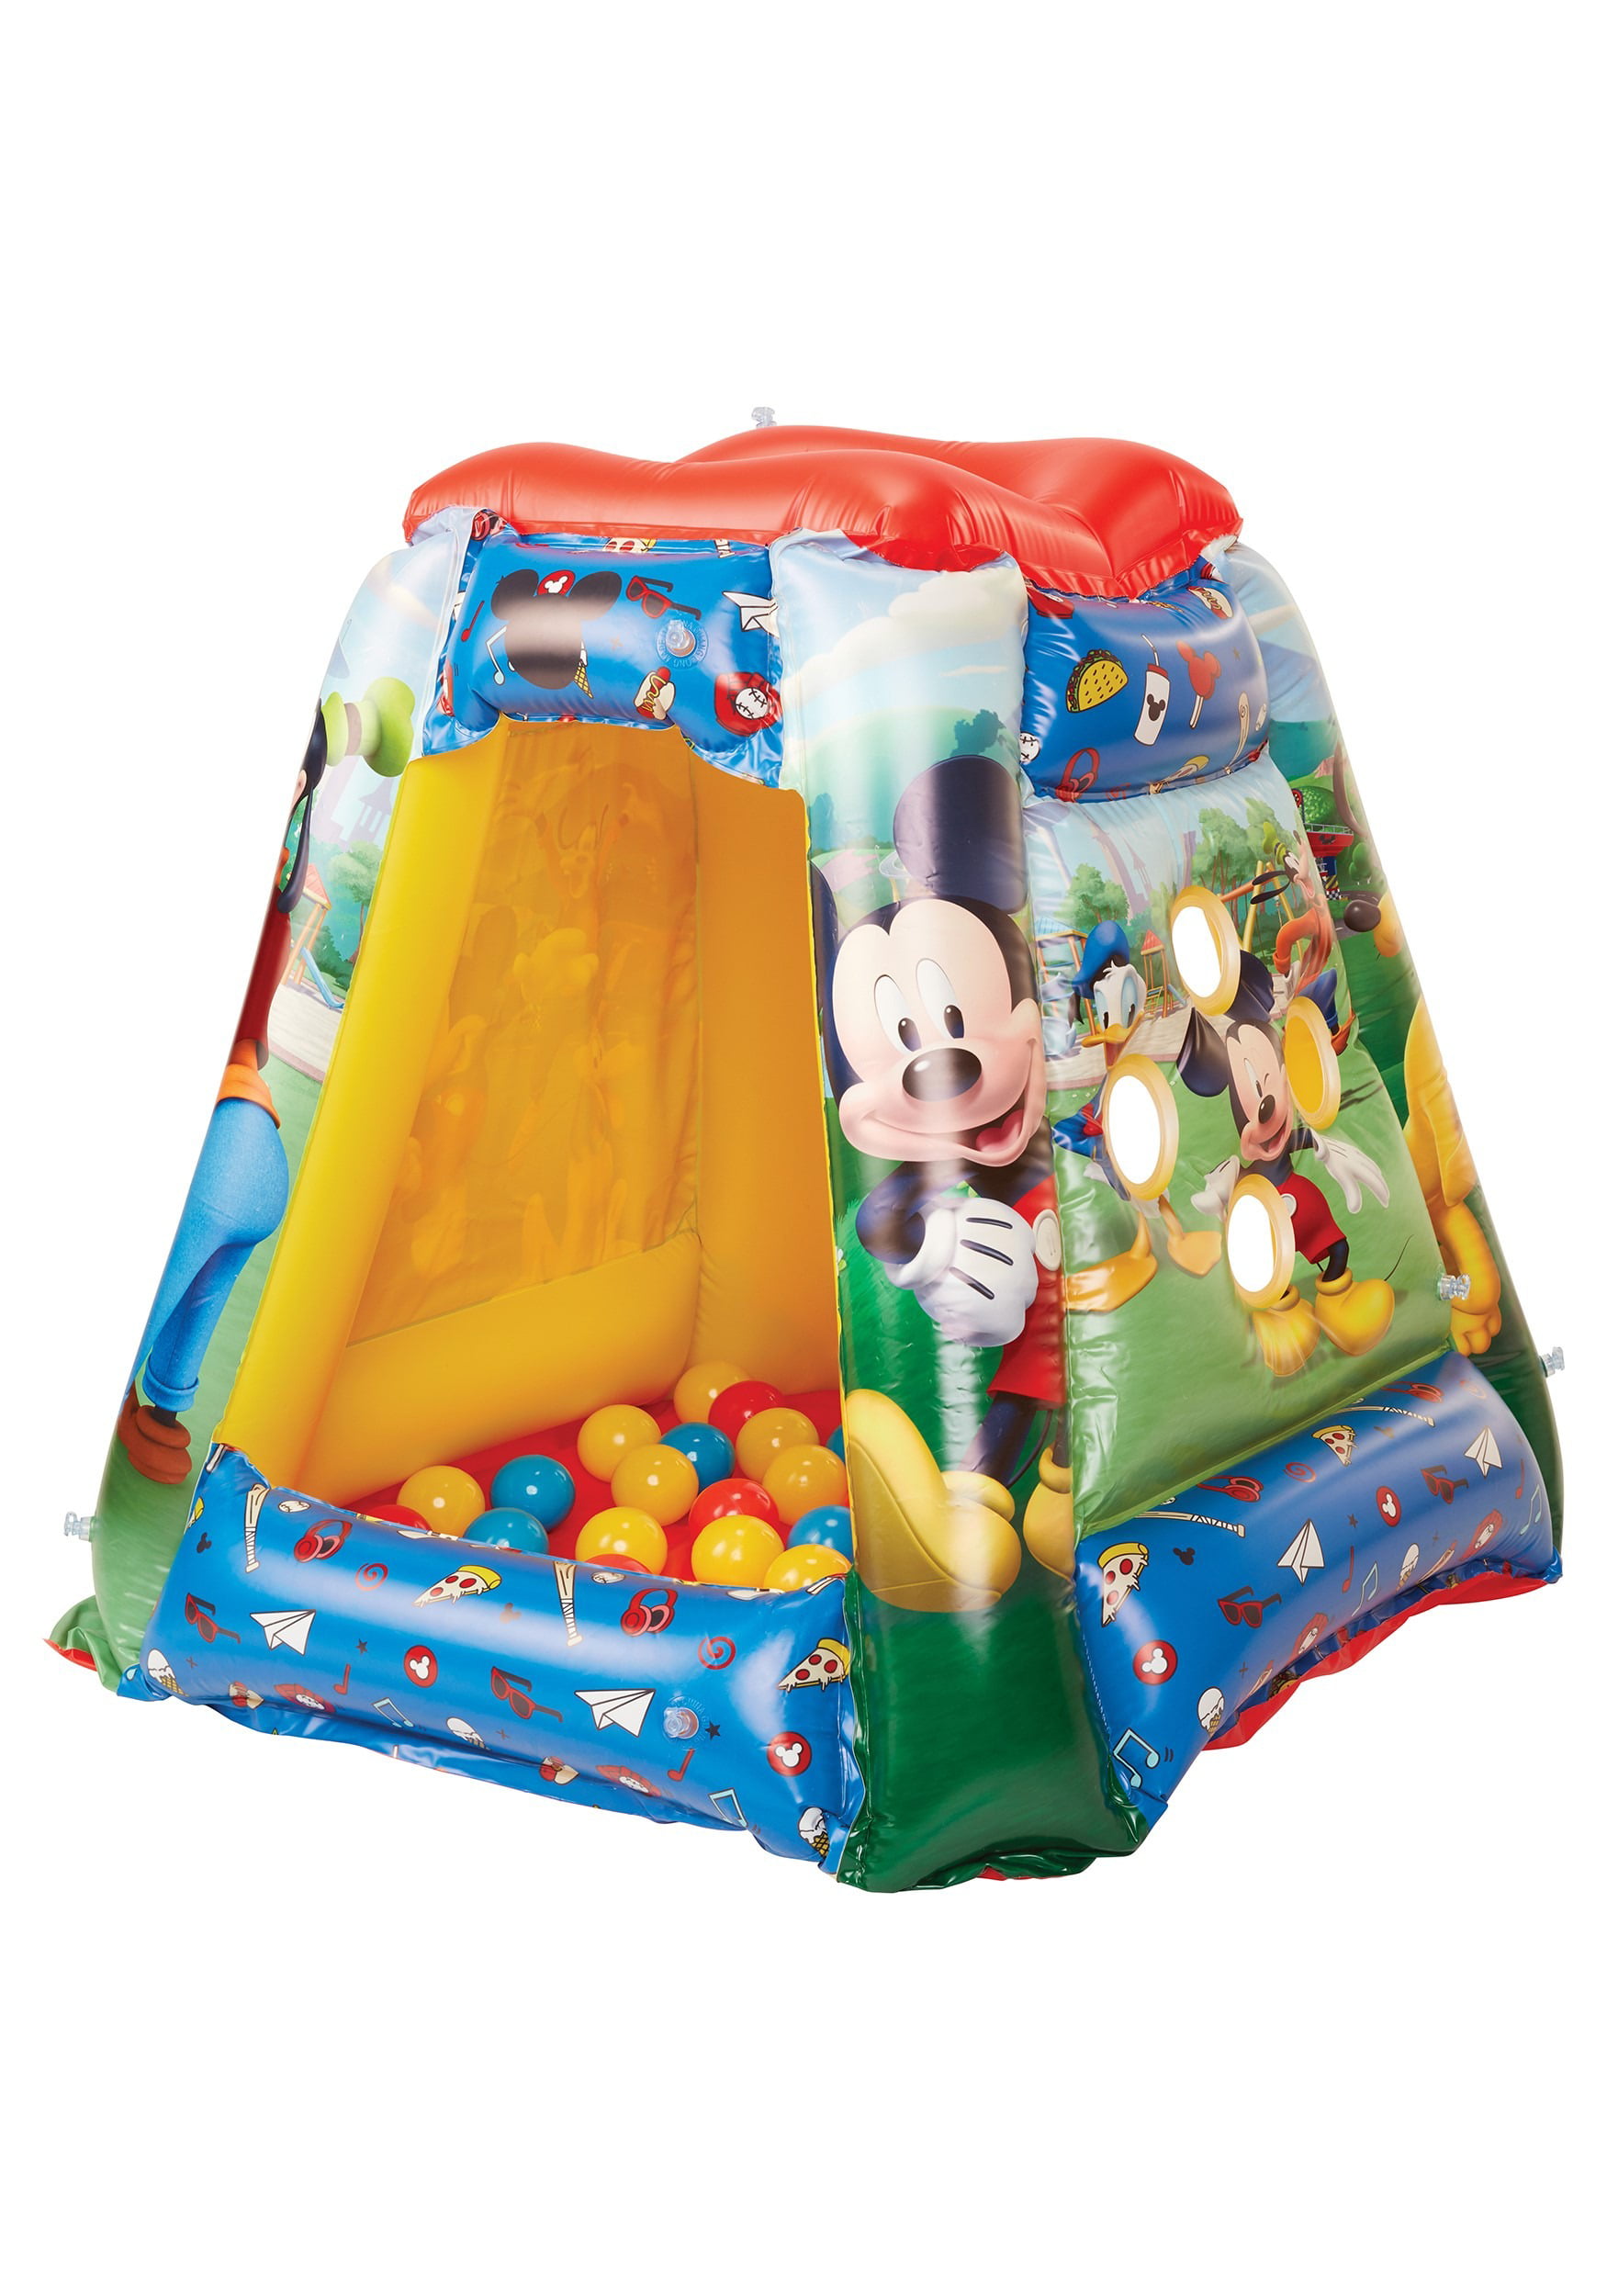 Mickey Mouse Kids Ball Pit with 20 Balls 